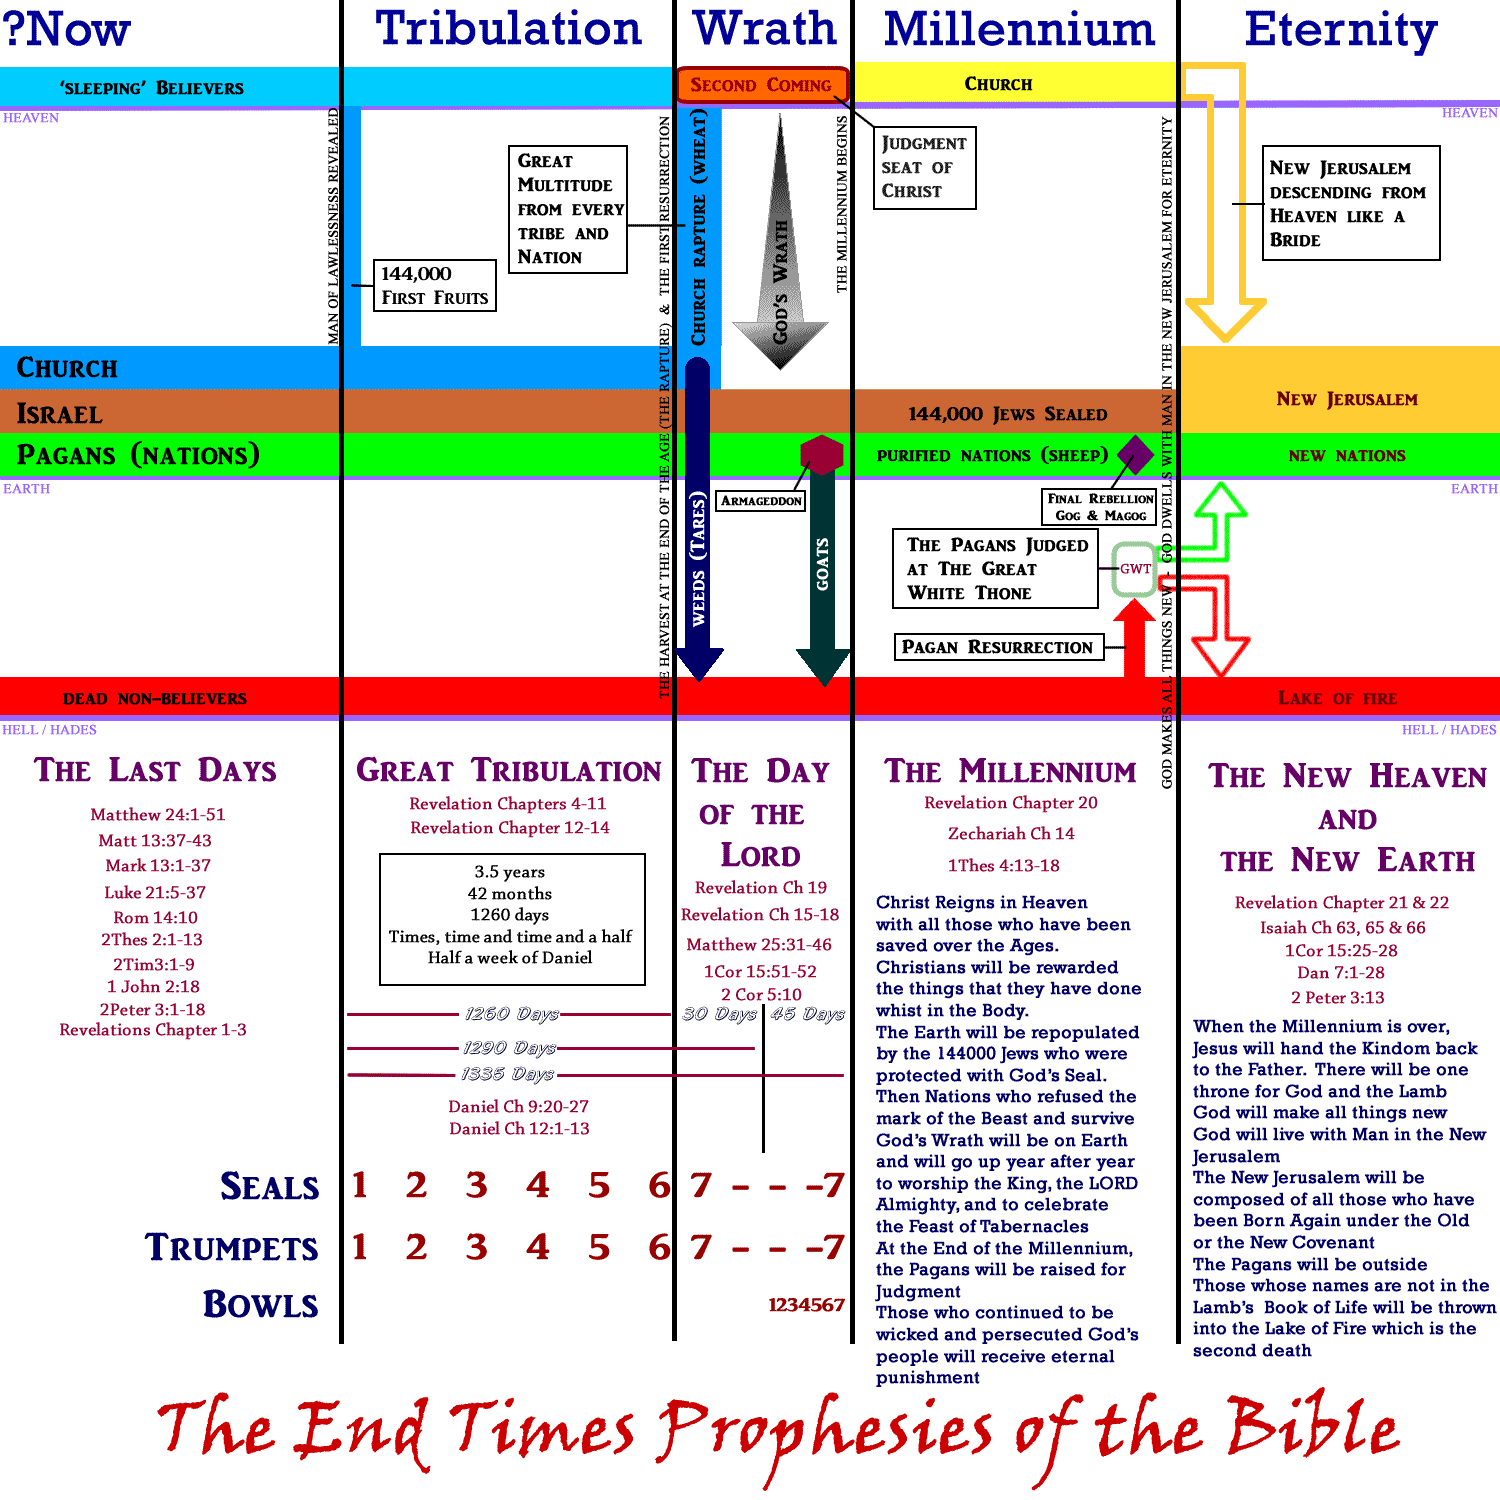 great tribulation, mark of the beast, rapture of the church, seven seals, trumpets and bowls revelation